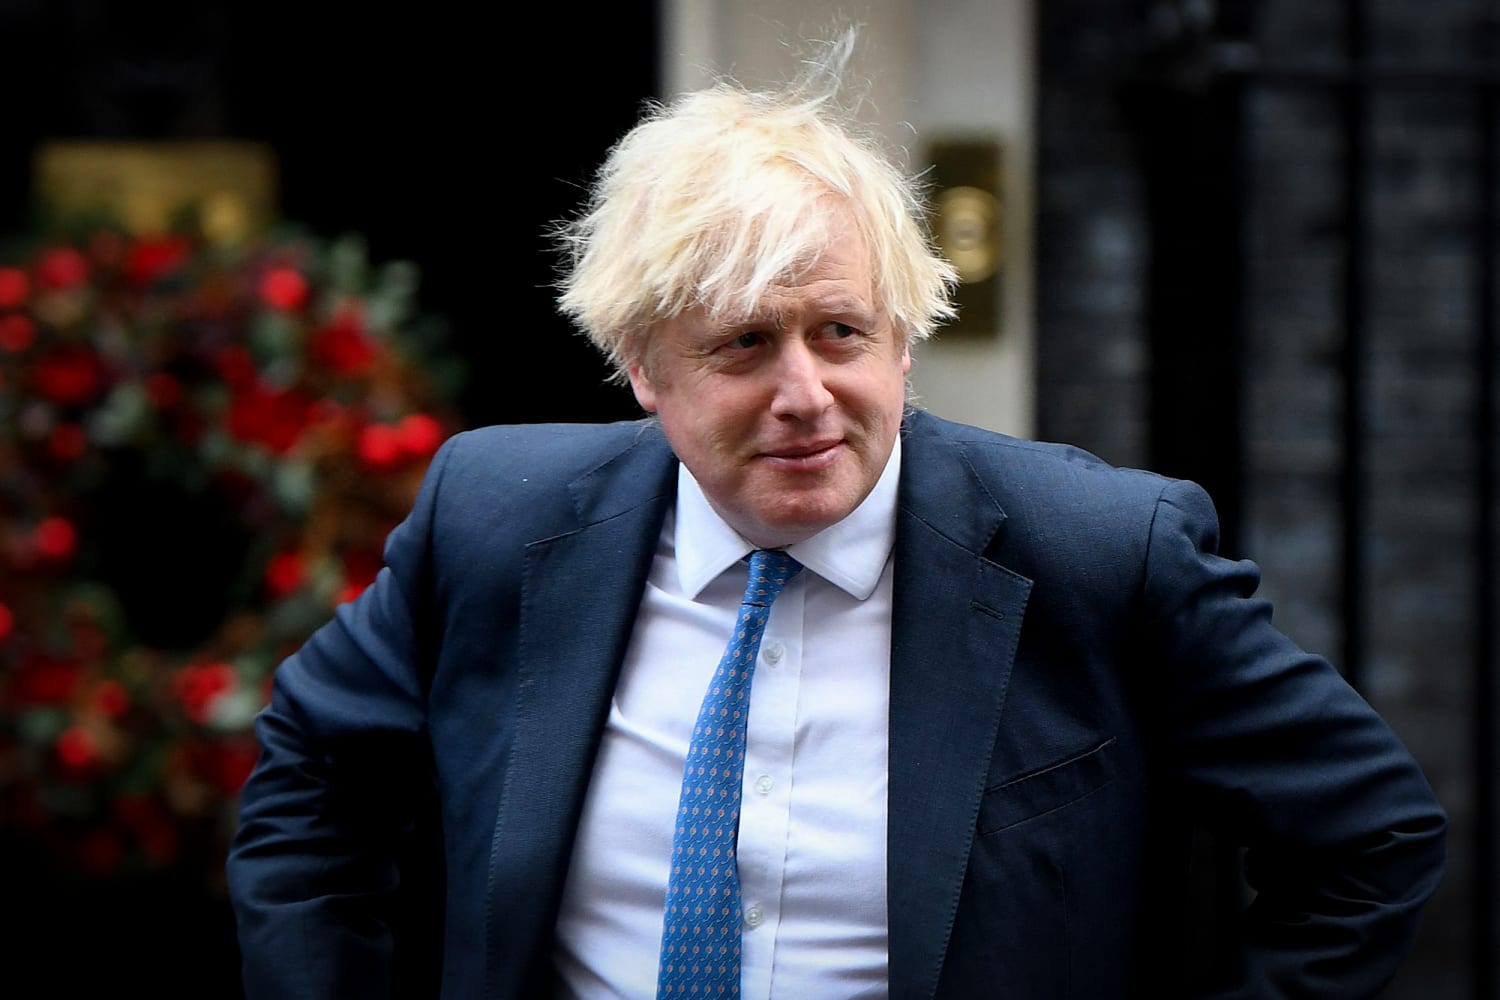 Boris Johnson’s wine and cheese lockdown gathering was not a party, deputy PM says